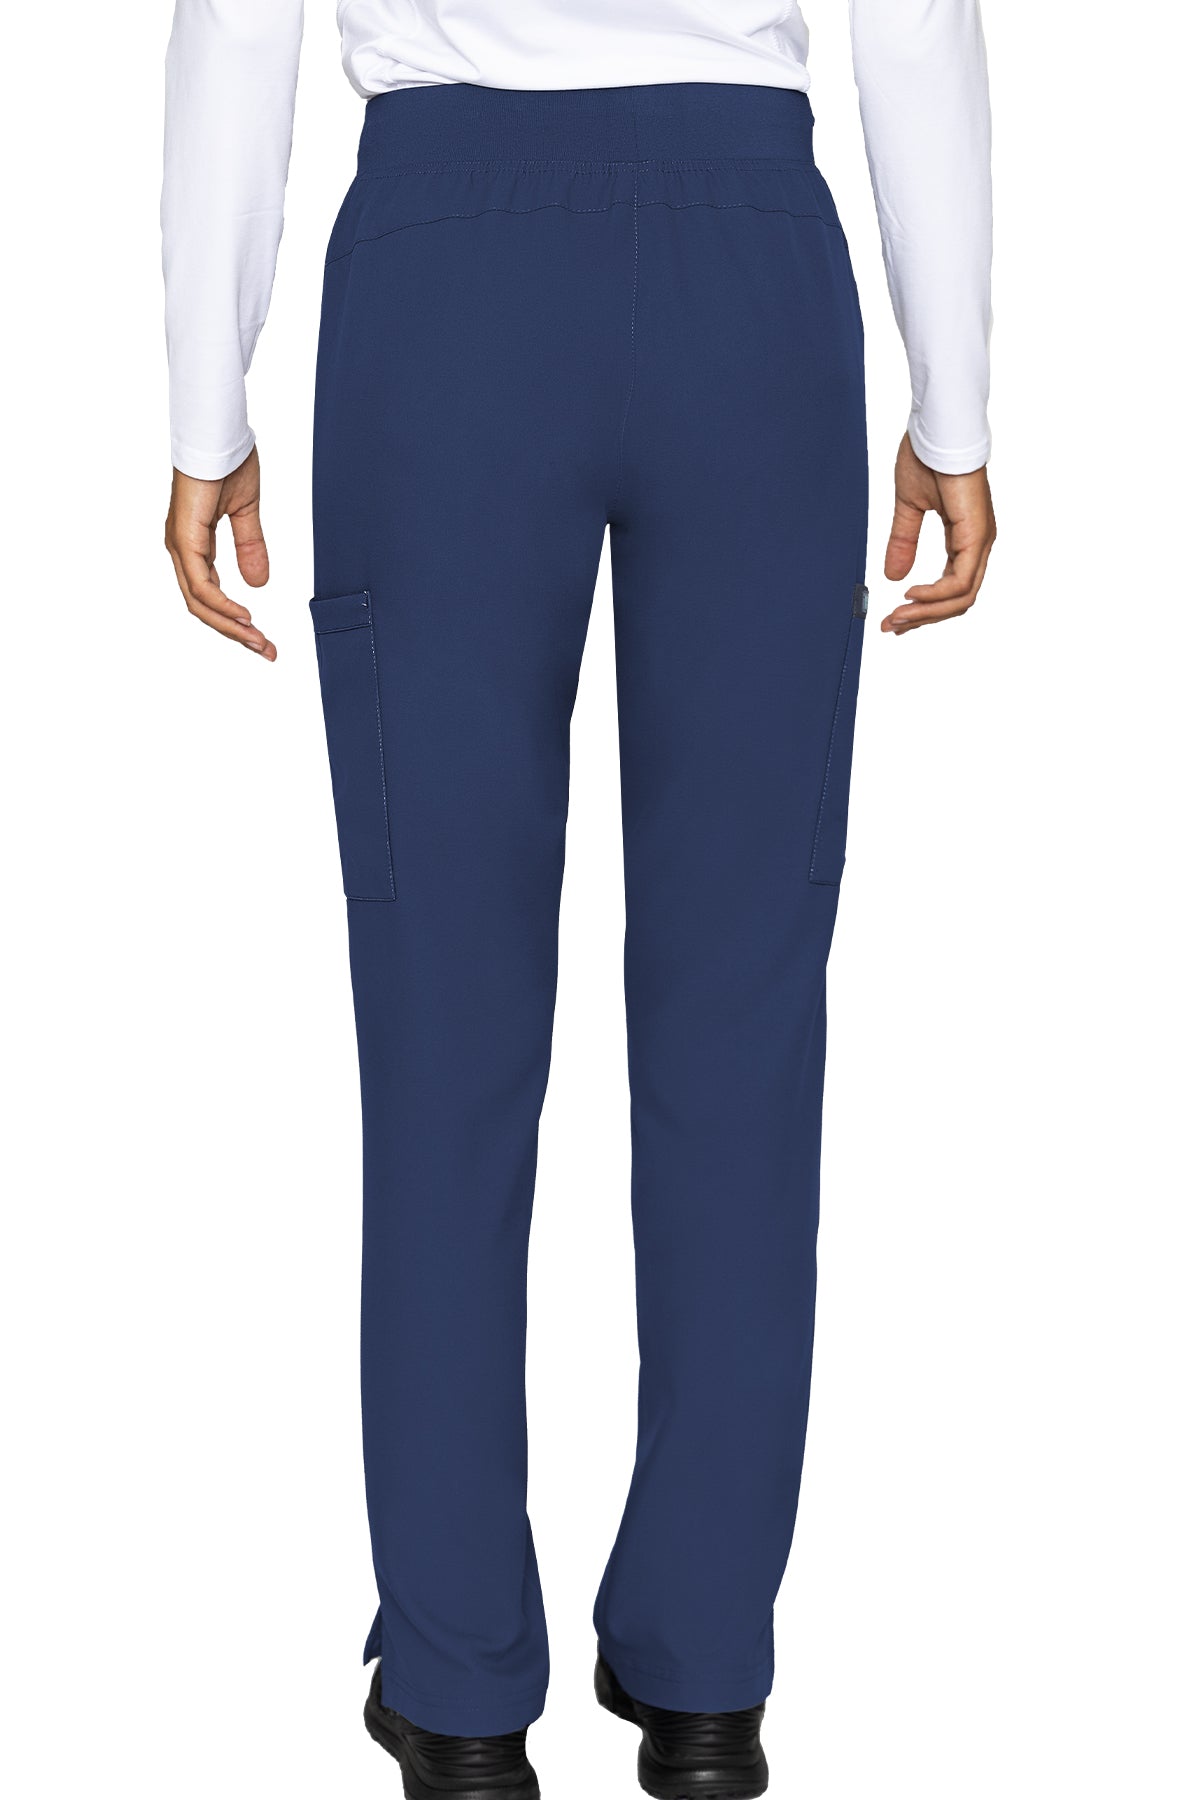 Med Couture 2702 Insight Women's Zipper Pocket Pant - TALL navy back